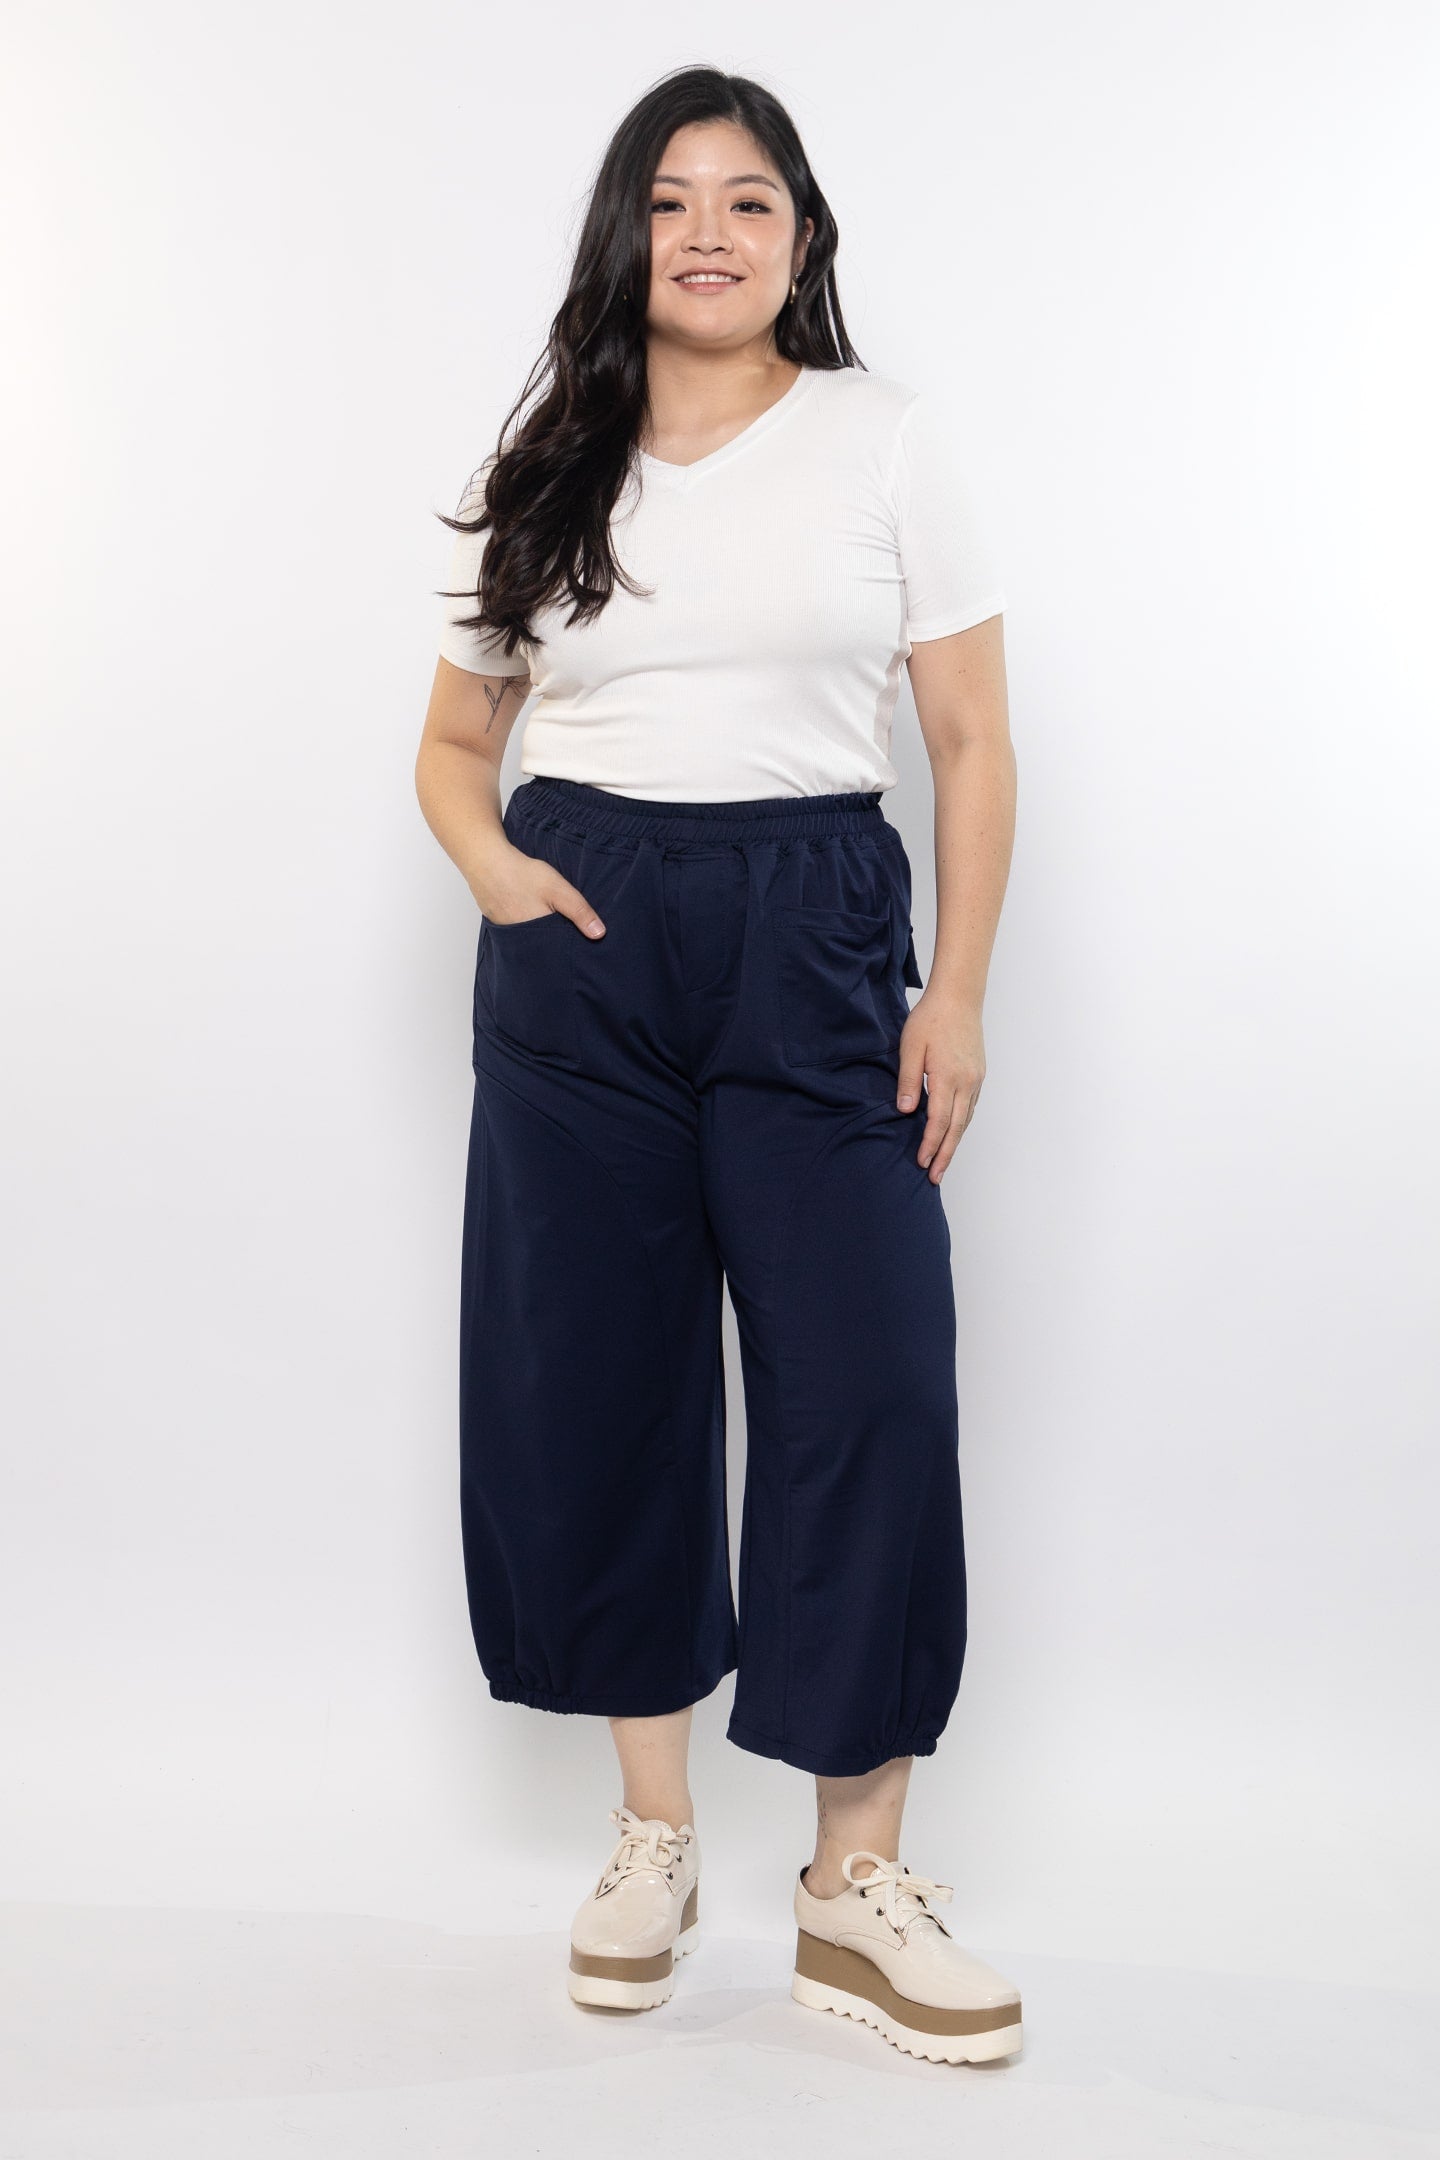 Bei Culottes Pants in Navy Blue